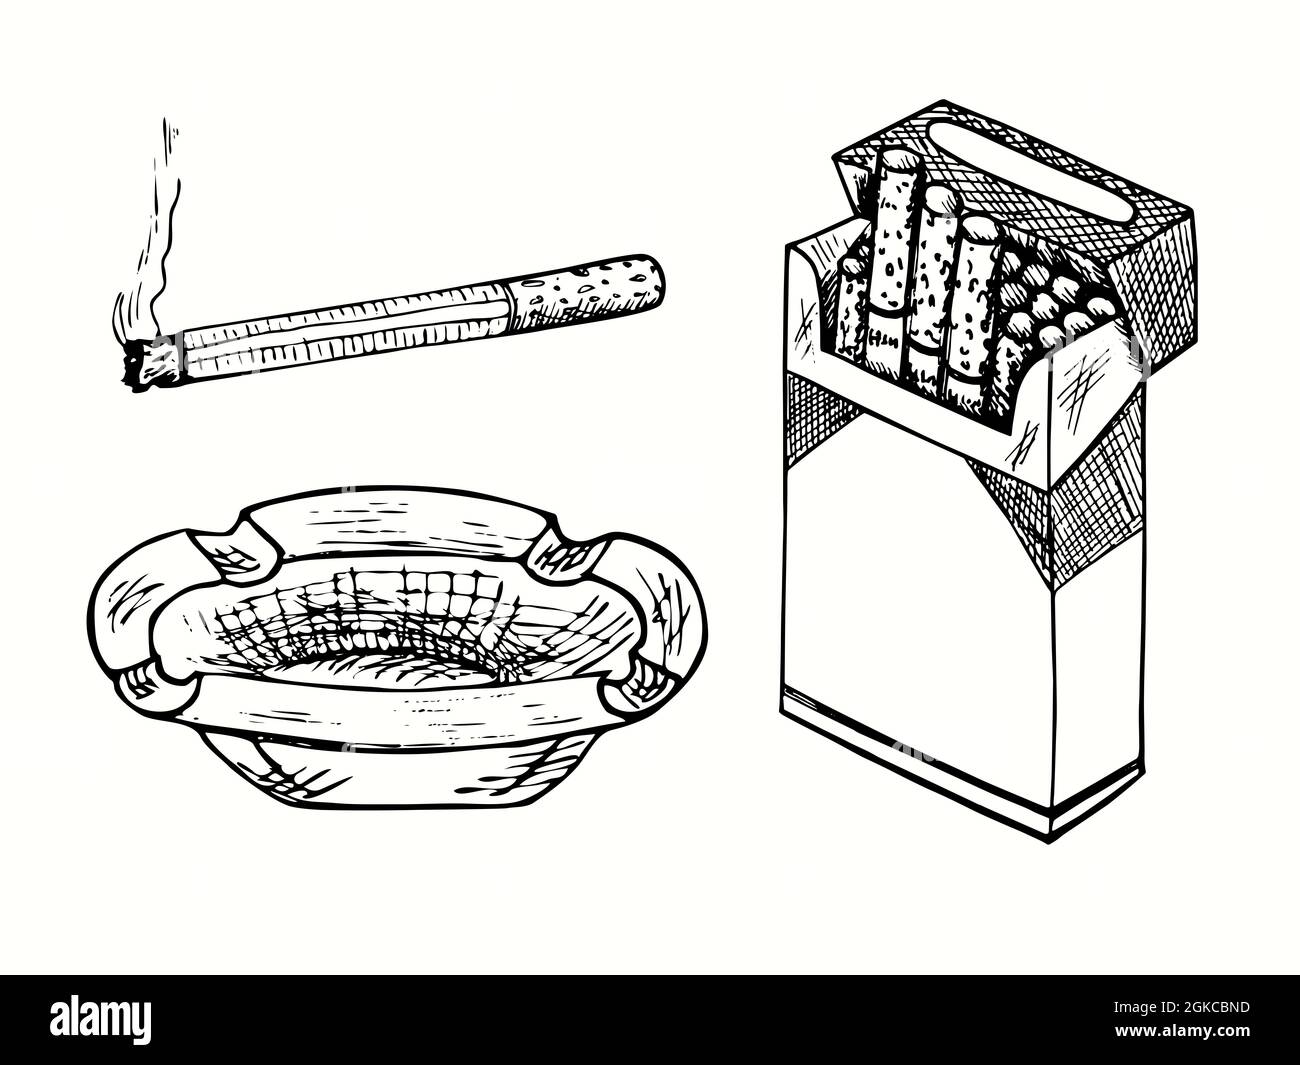 how to draw a pack of cigarettes